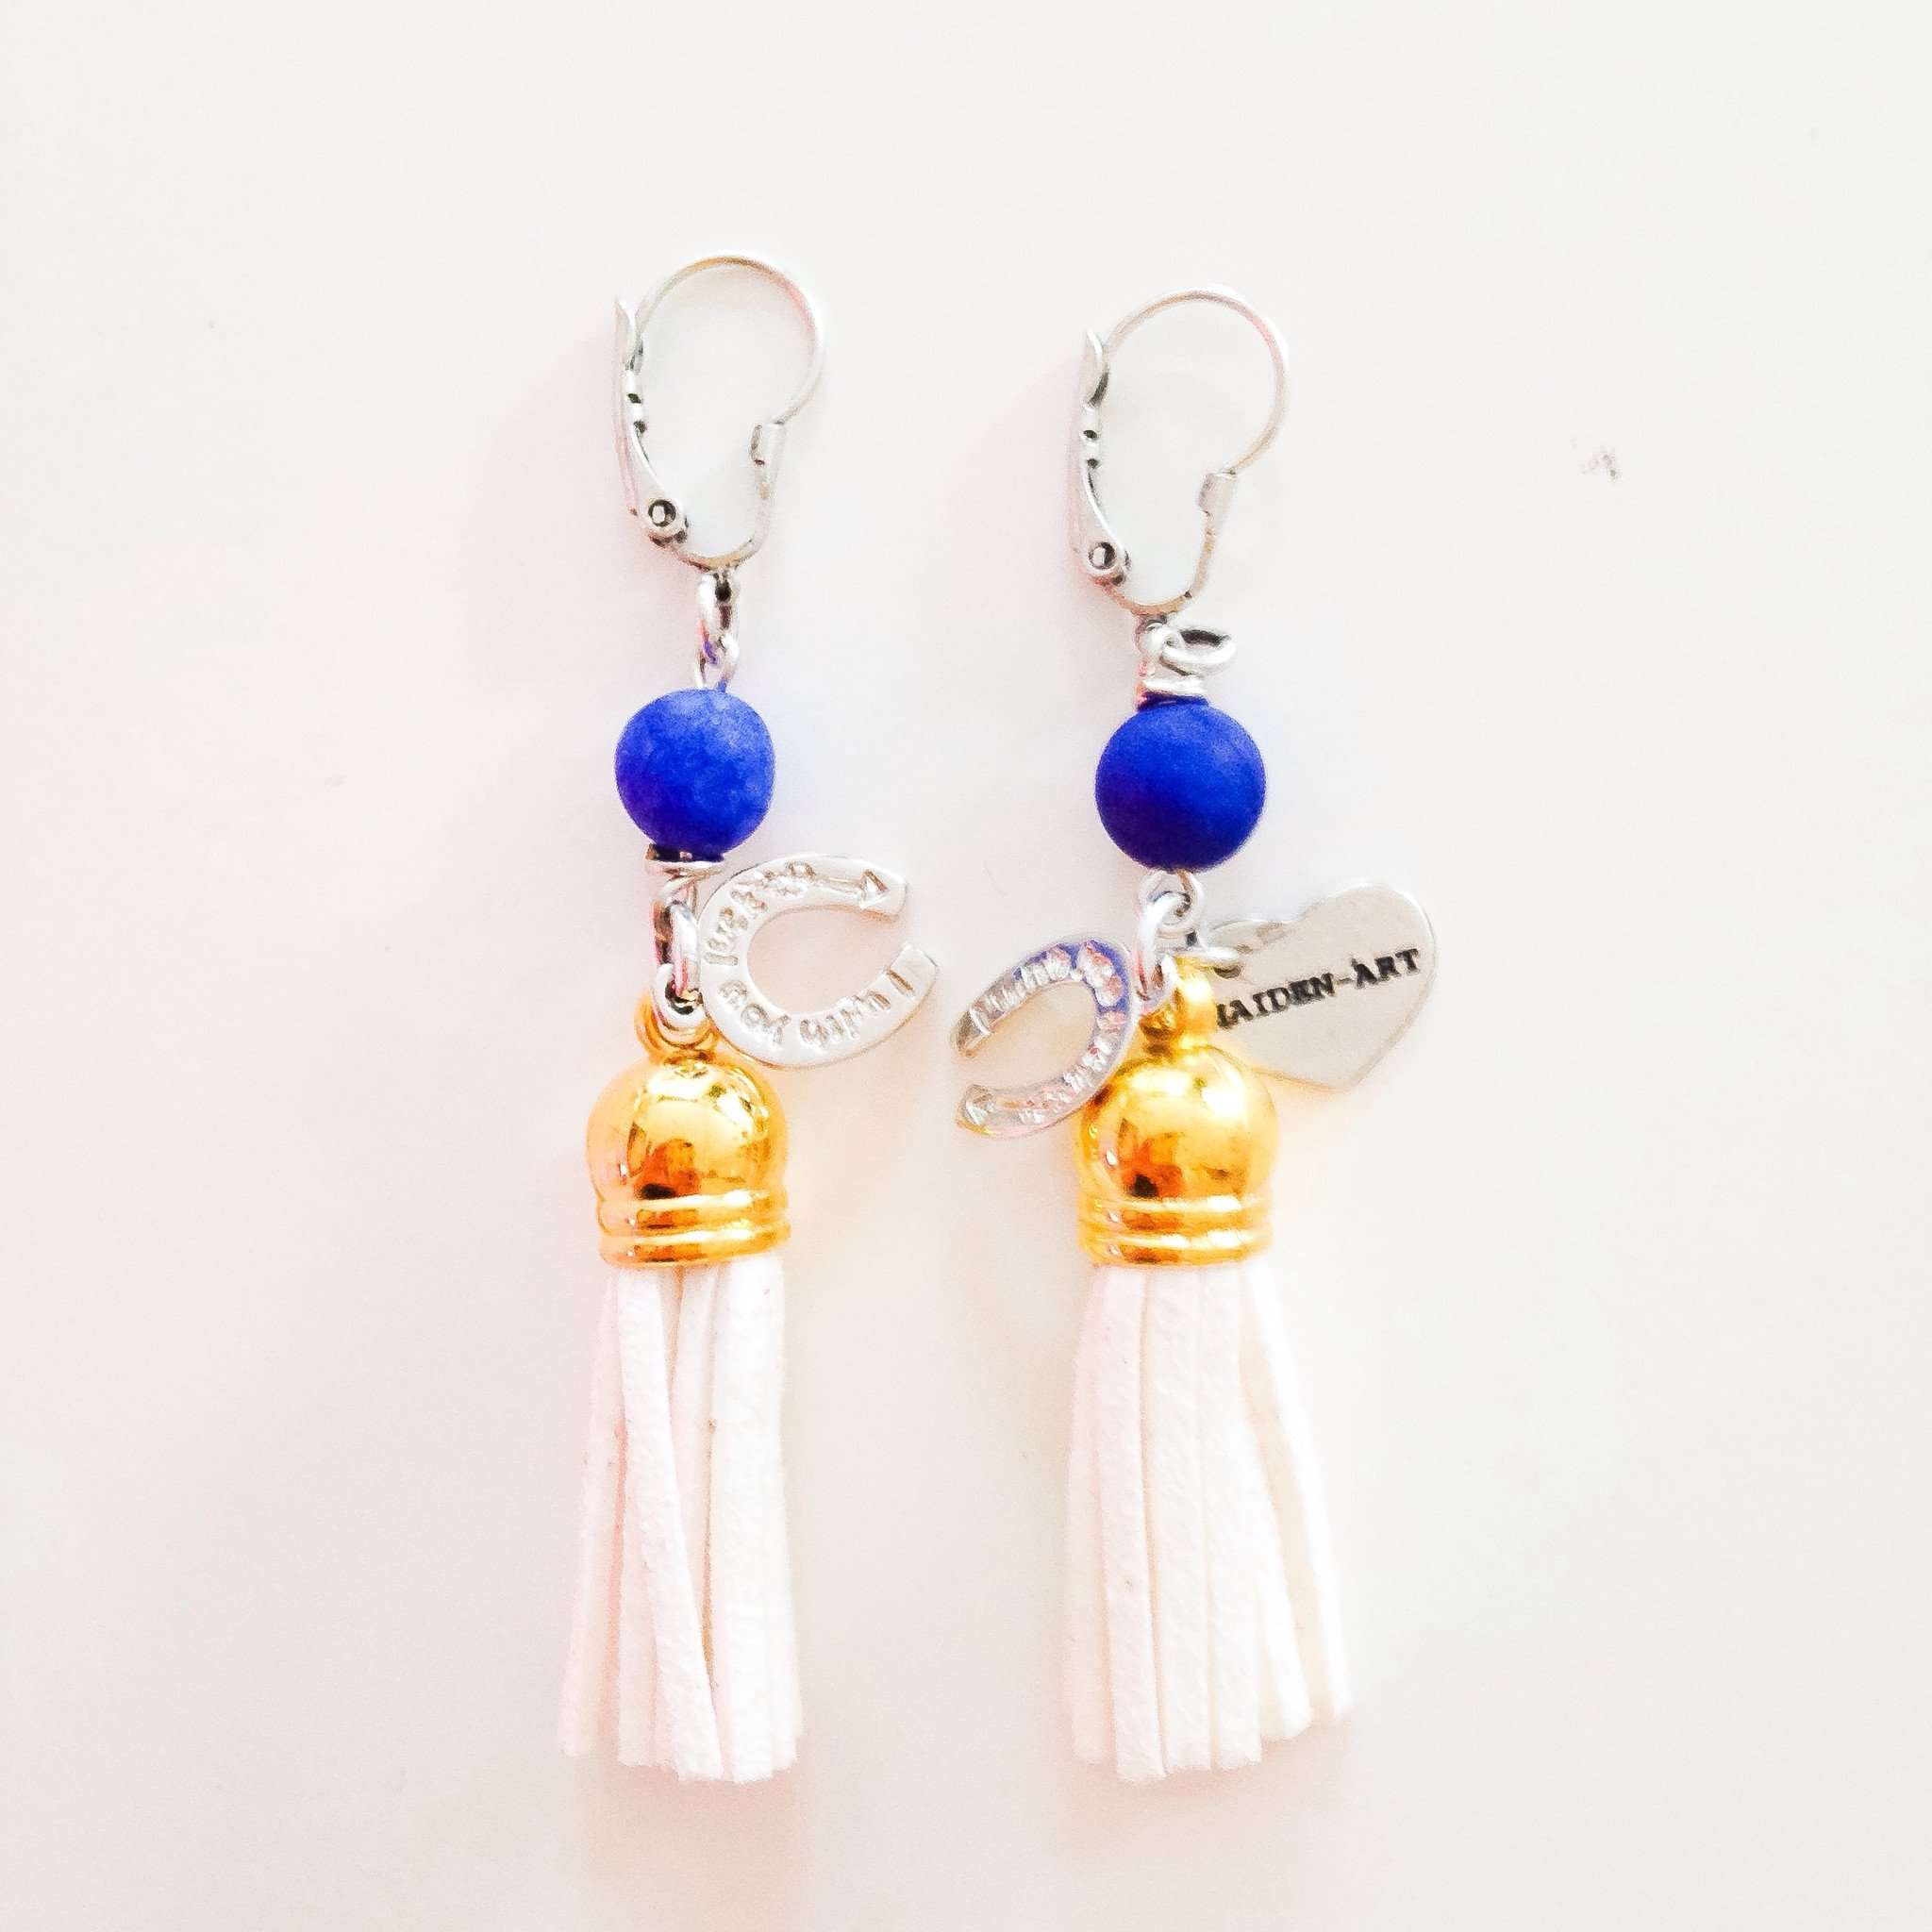 Colorful Tassel Earrings. Perfect for Parties and Summer Festivals.